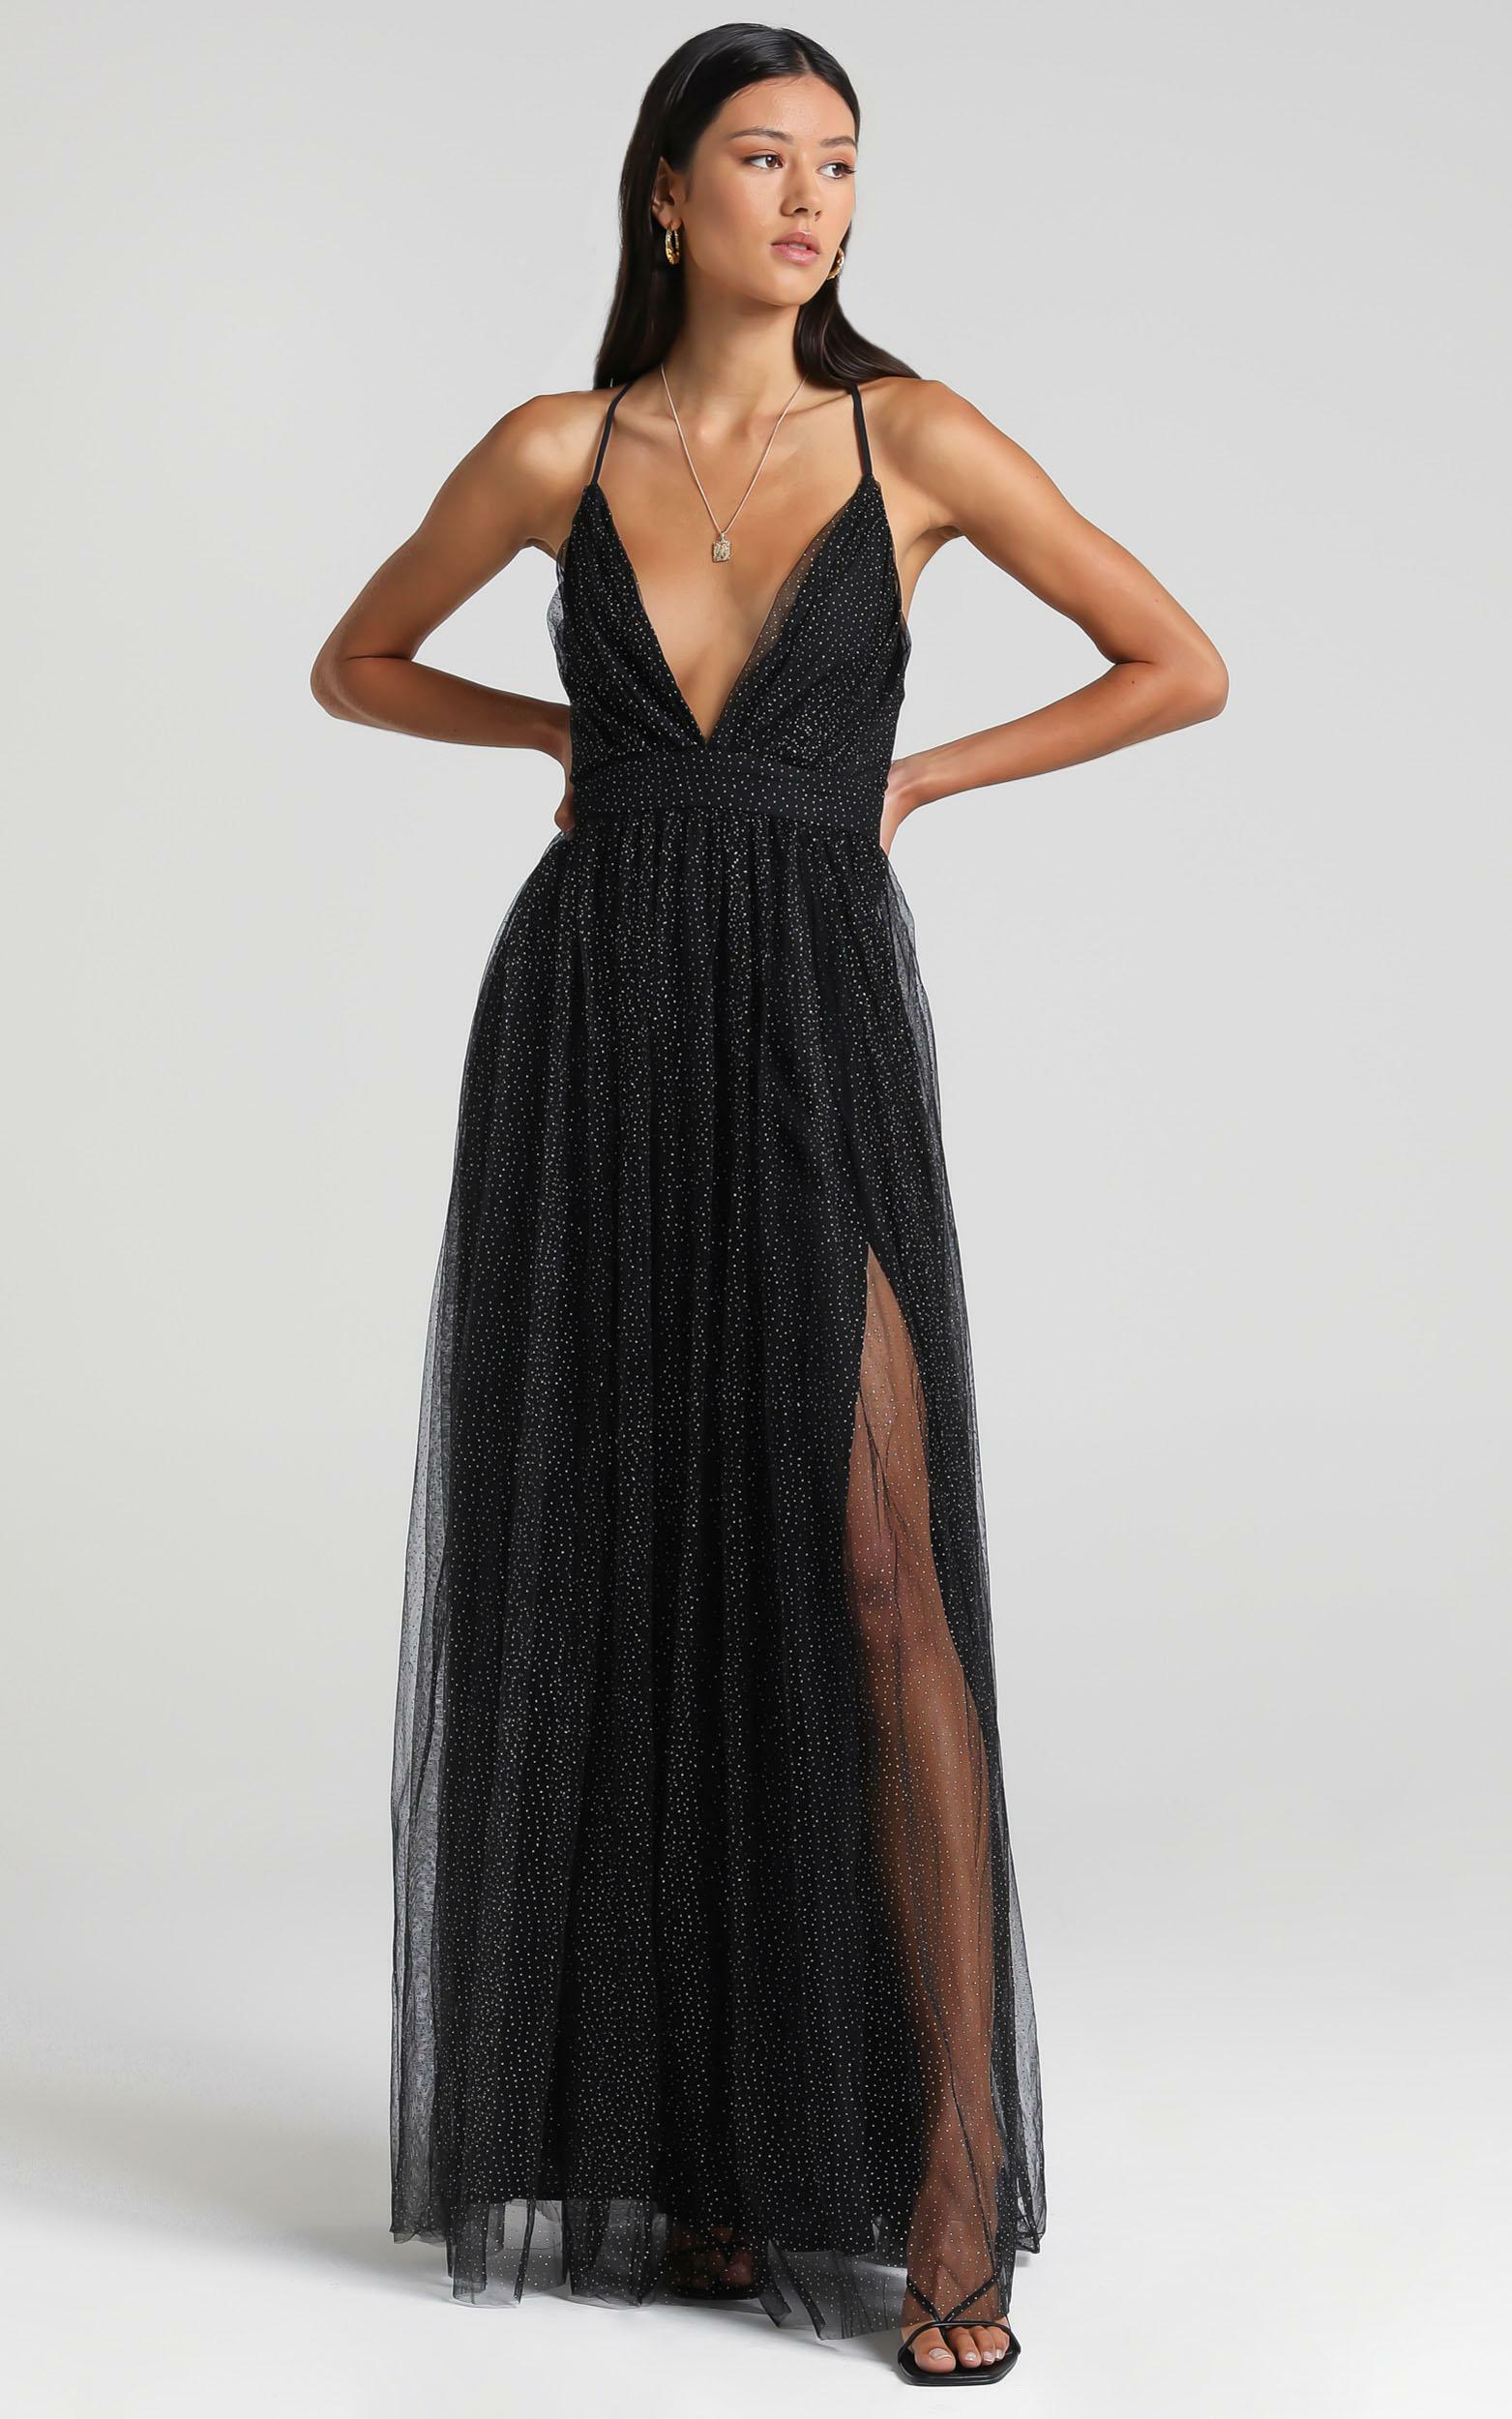 Tell Me Lies Dress in Black Spot Tulle - 04, BLK1, hi-res image number null